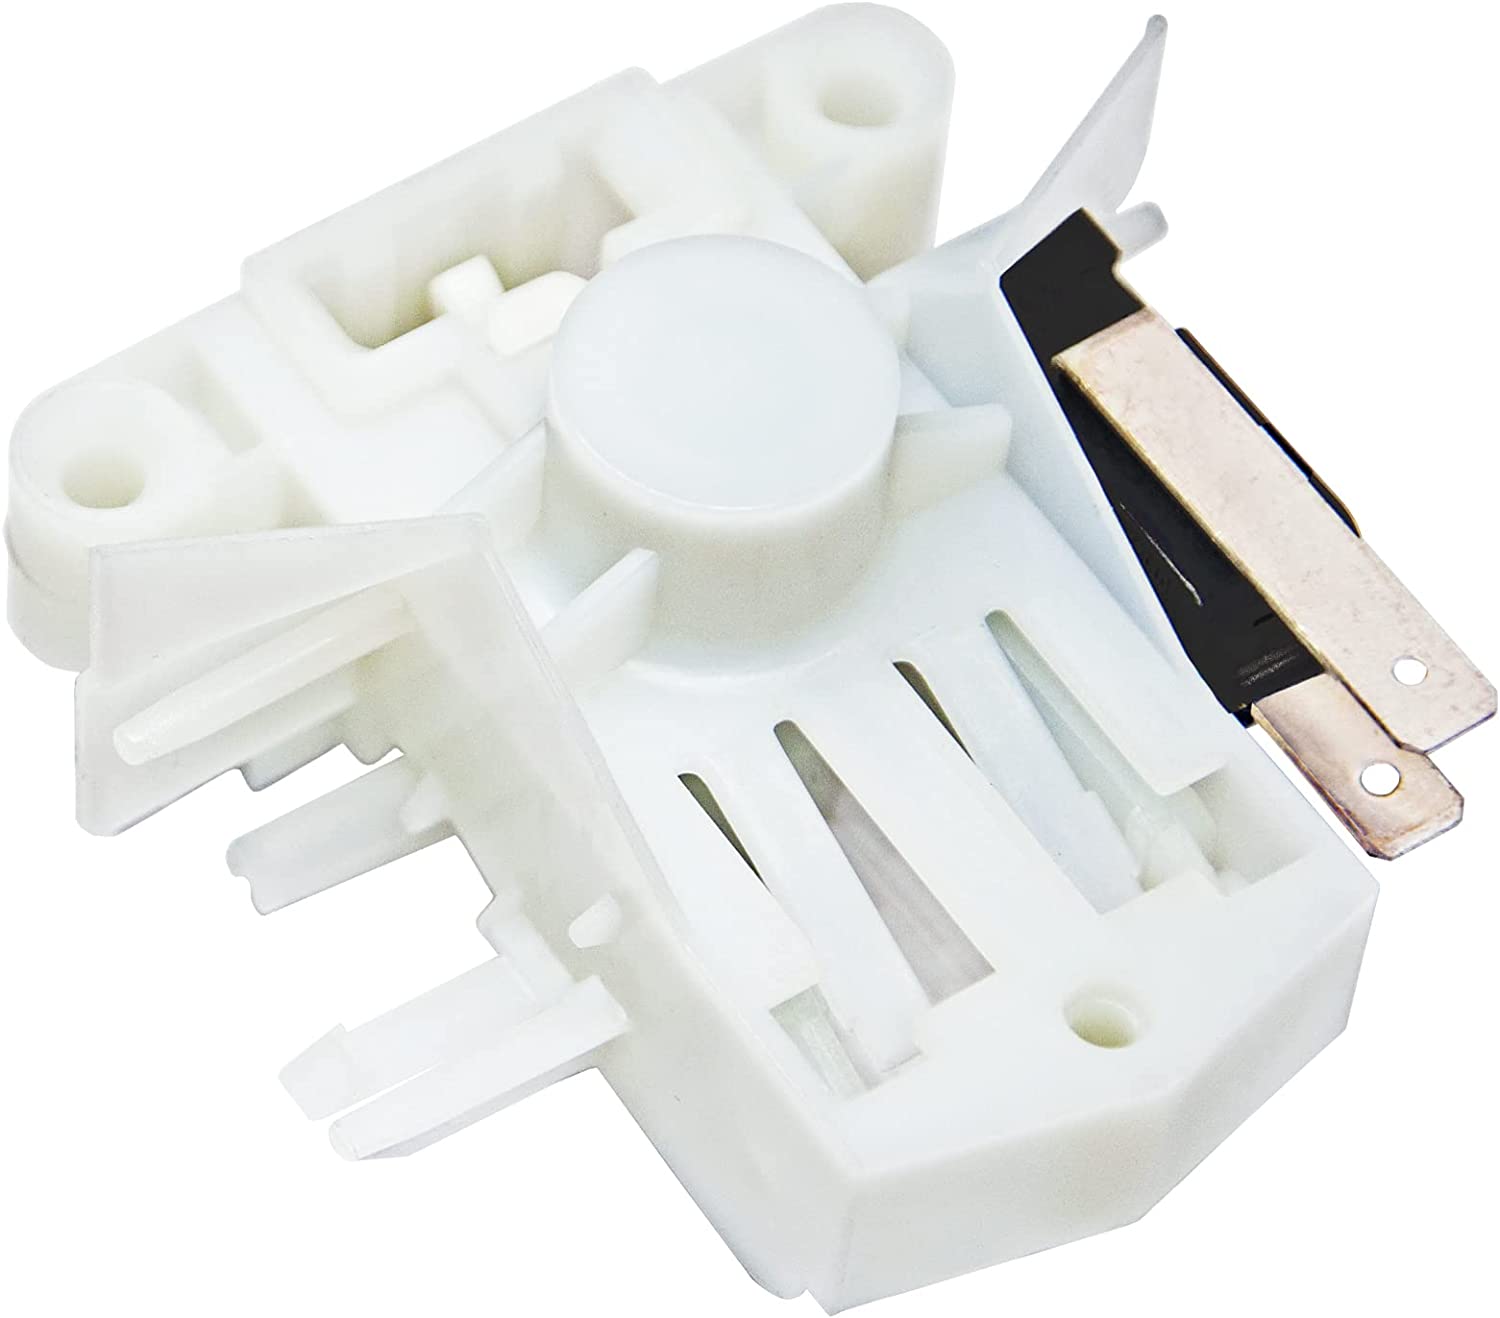 dw80k7050ug dw80f600utb/aa dw80k5050us Upgrade DD81-01629A DD81-02132A Dishwasher Door Latch Switch Replacement for Sam.sung dw80f600uts dw80f600utw Parts AP6287051 dw80f600uts/aa dw80j3020us 